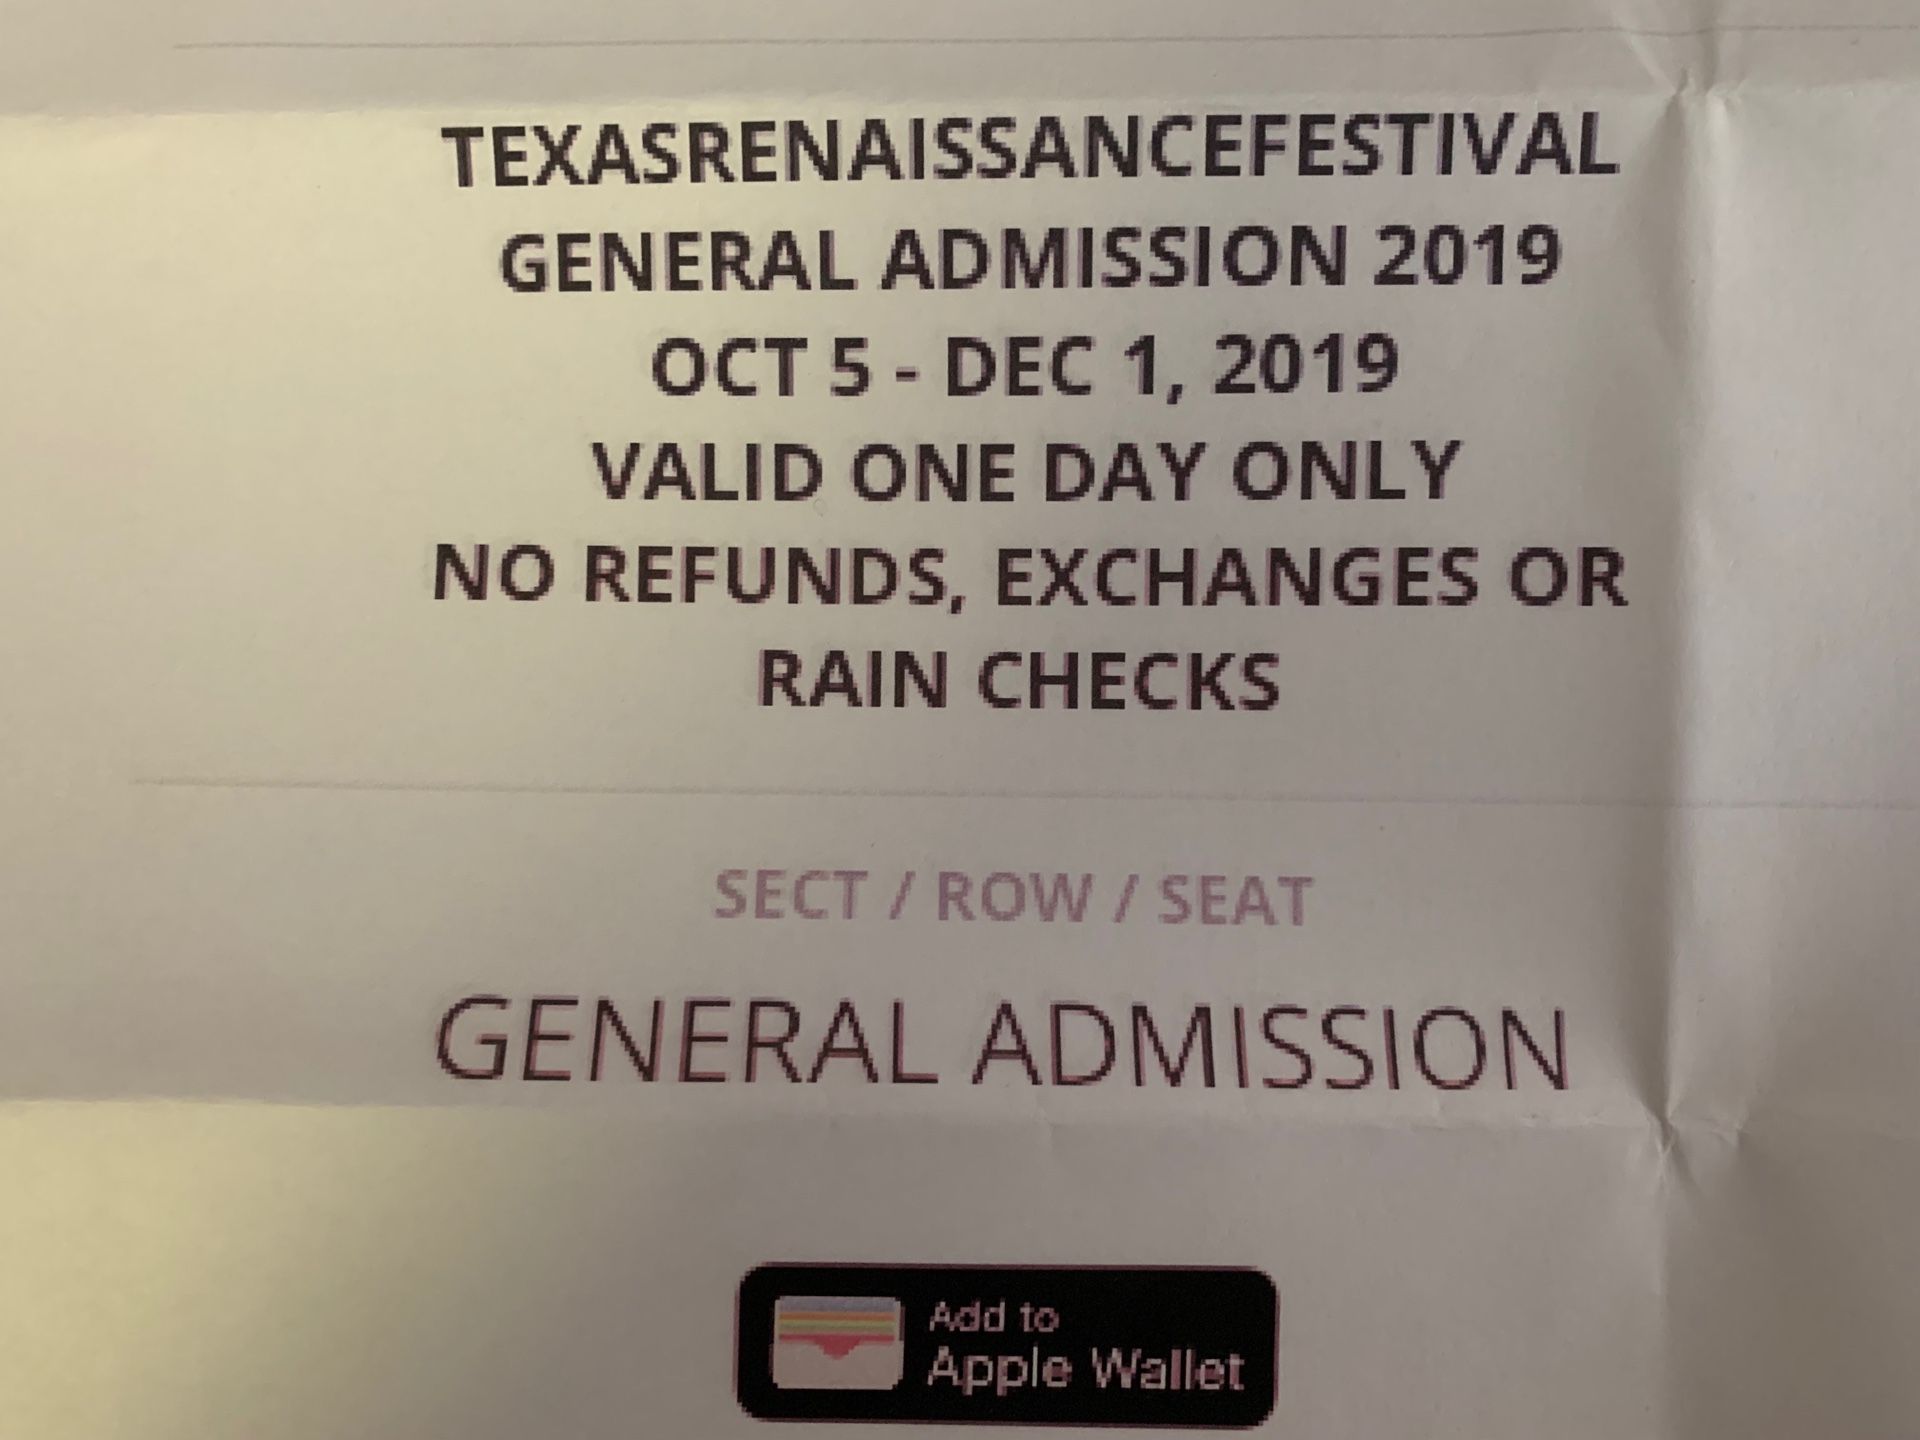 I am trying to help some friends sell2 tickets to the Texas Renaissance Festival in Houston